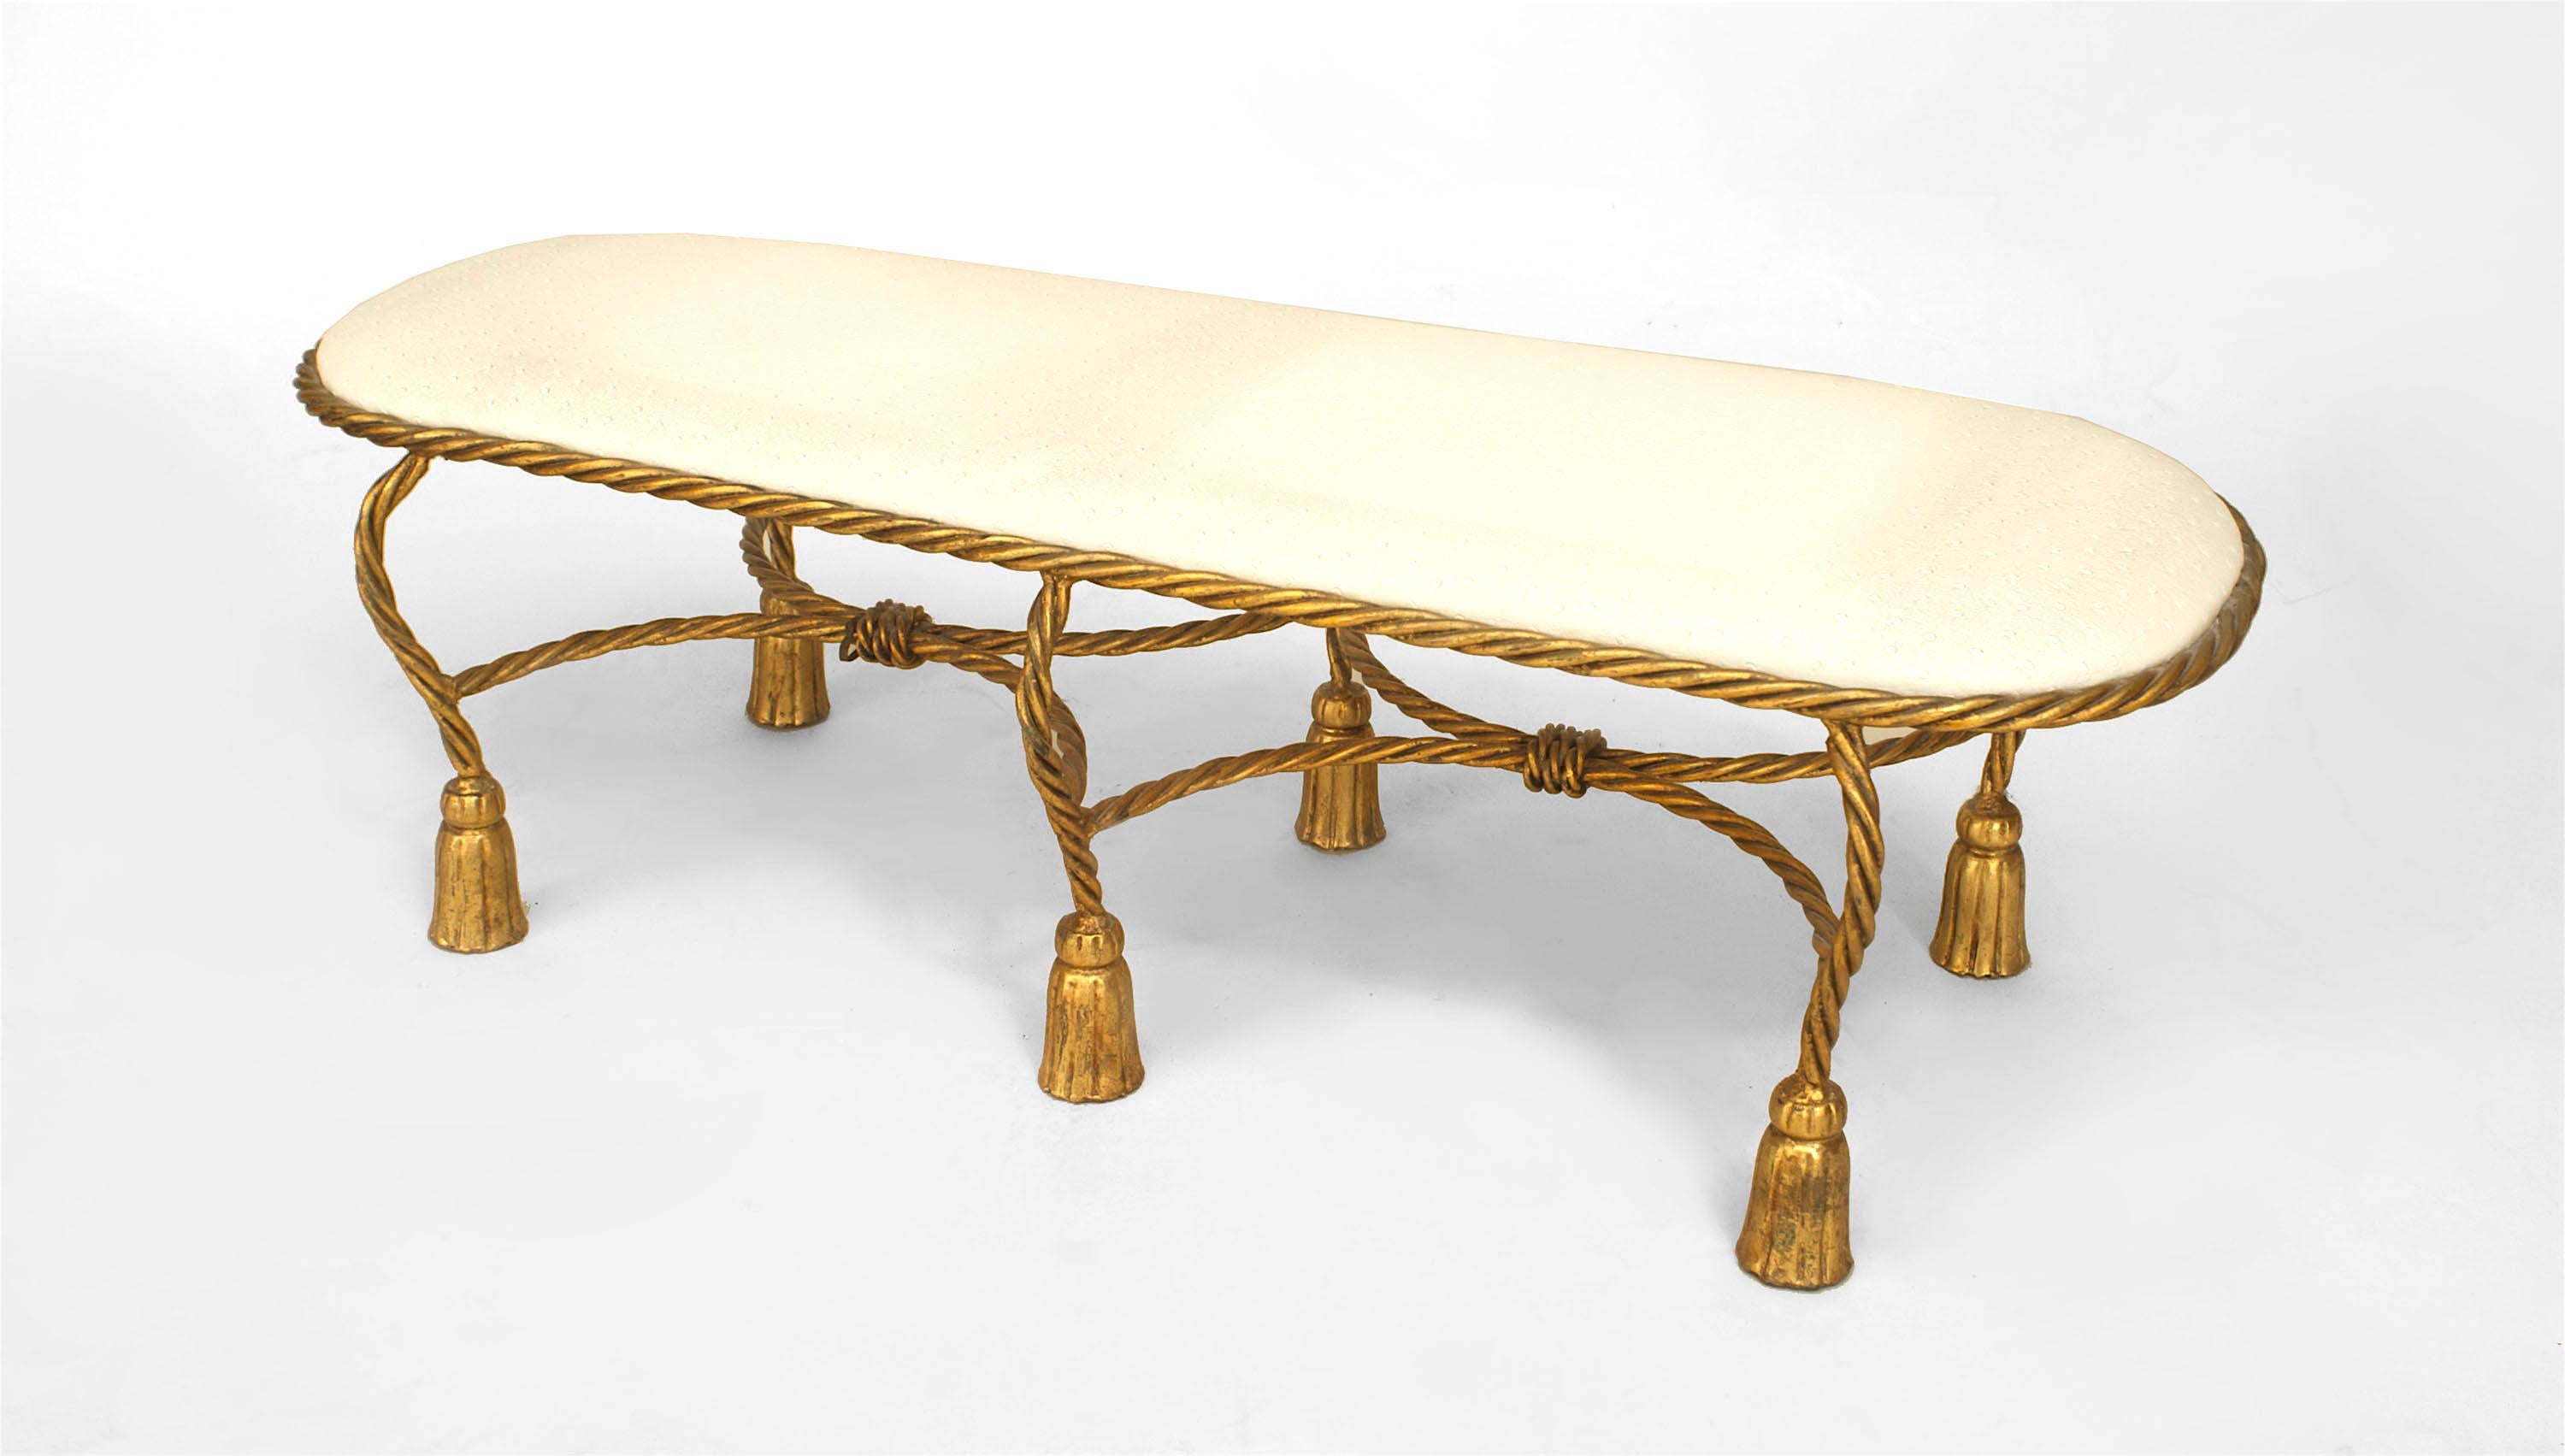 1940's Italian rope and tassel design bench with a white leather low, oval seat supported by a gilt metal rope-form frame resting on six legs joined by two intersecting stretchers.